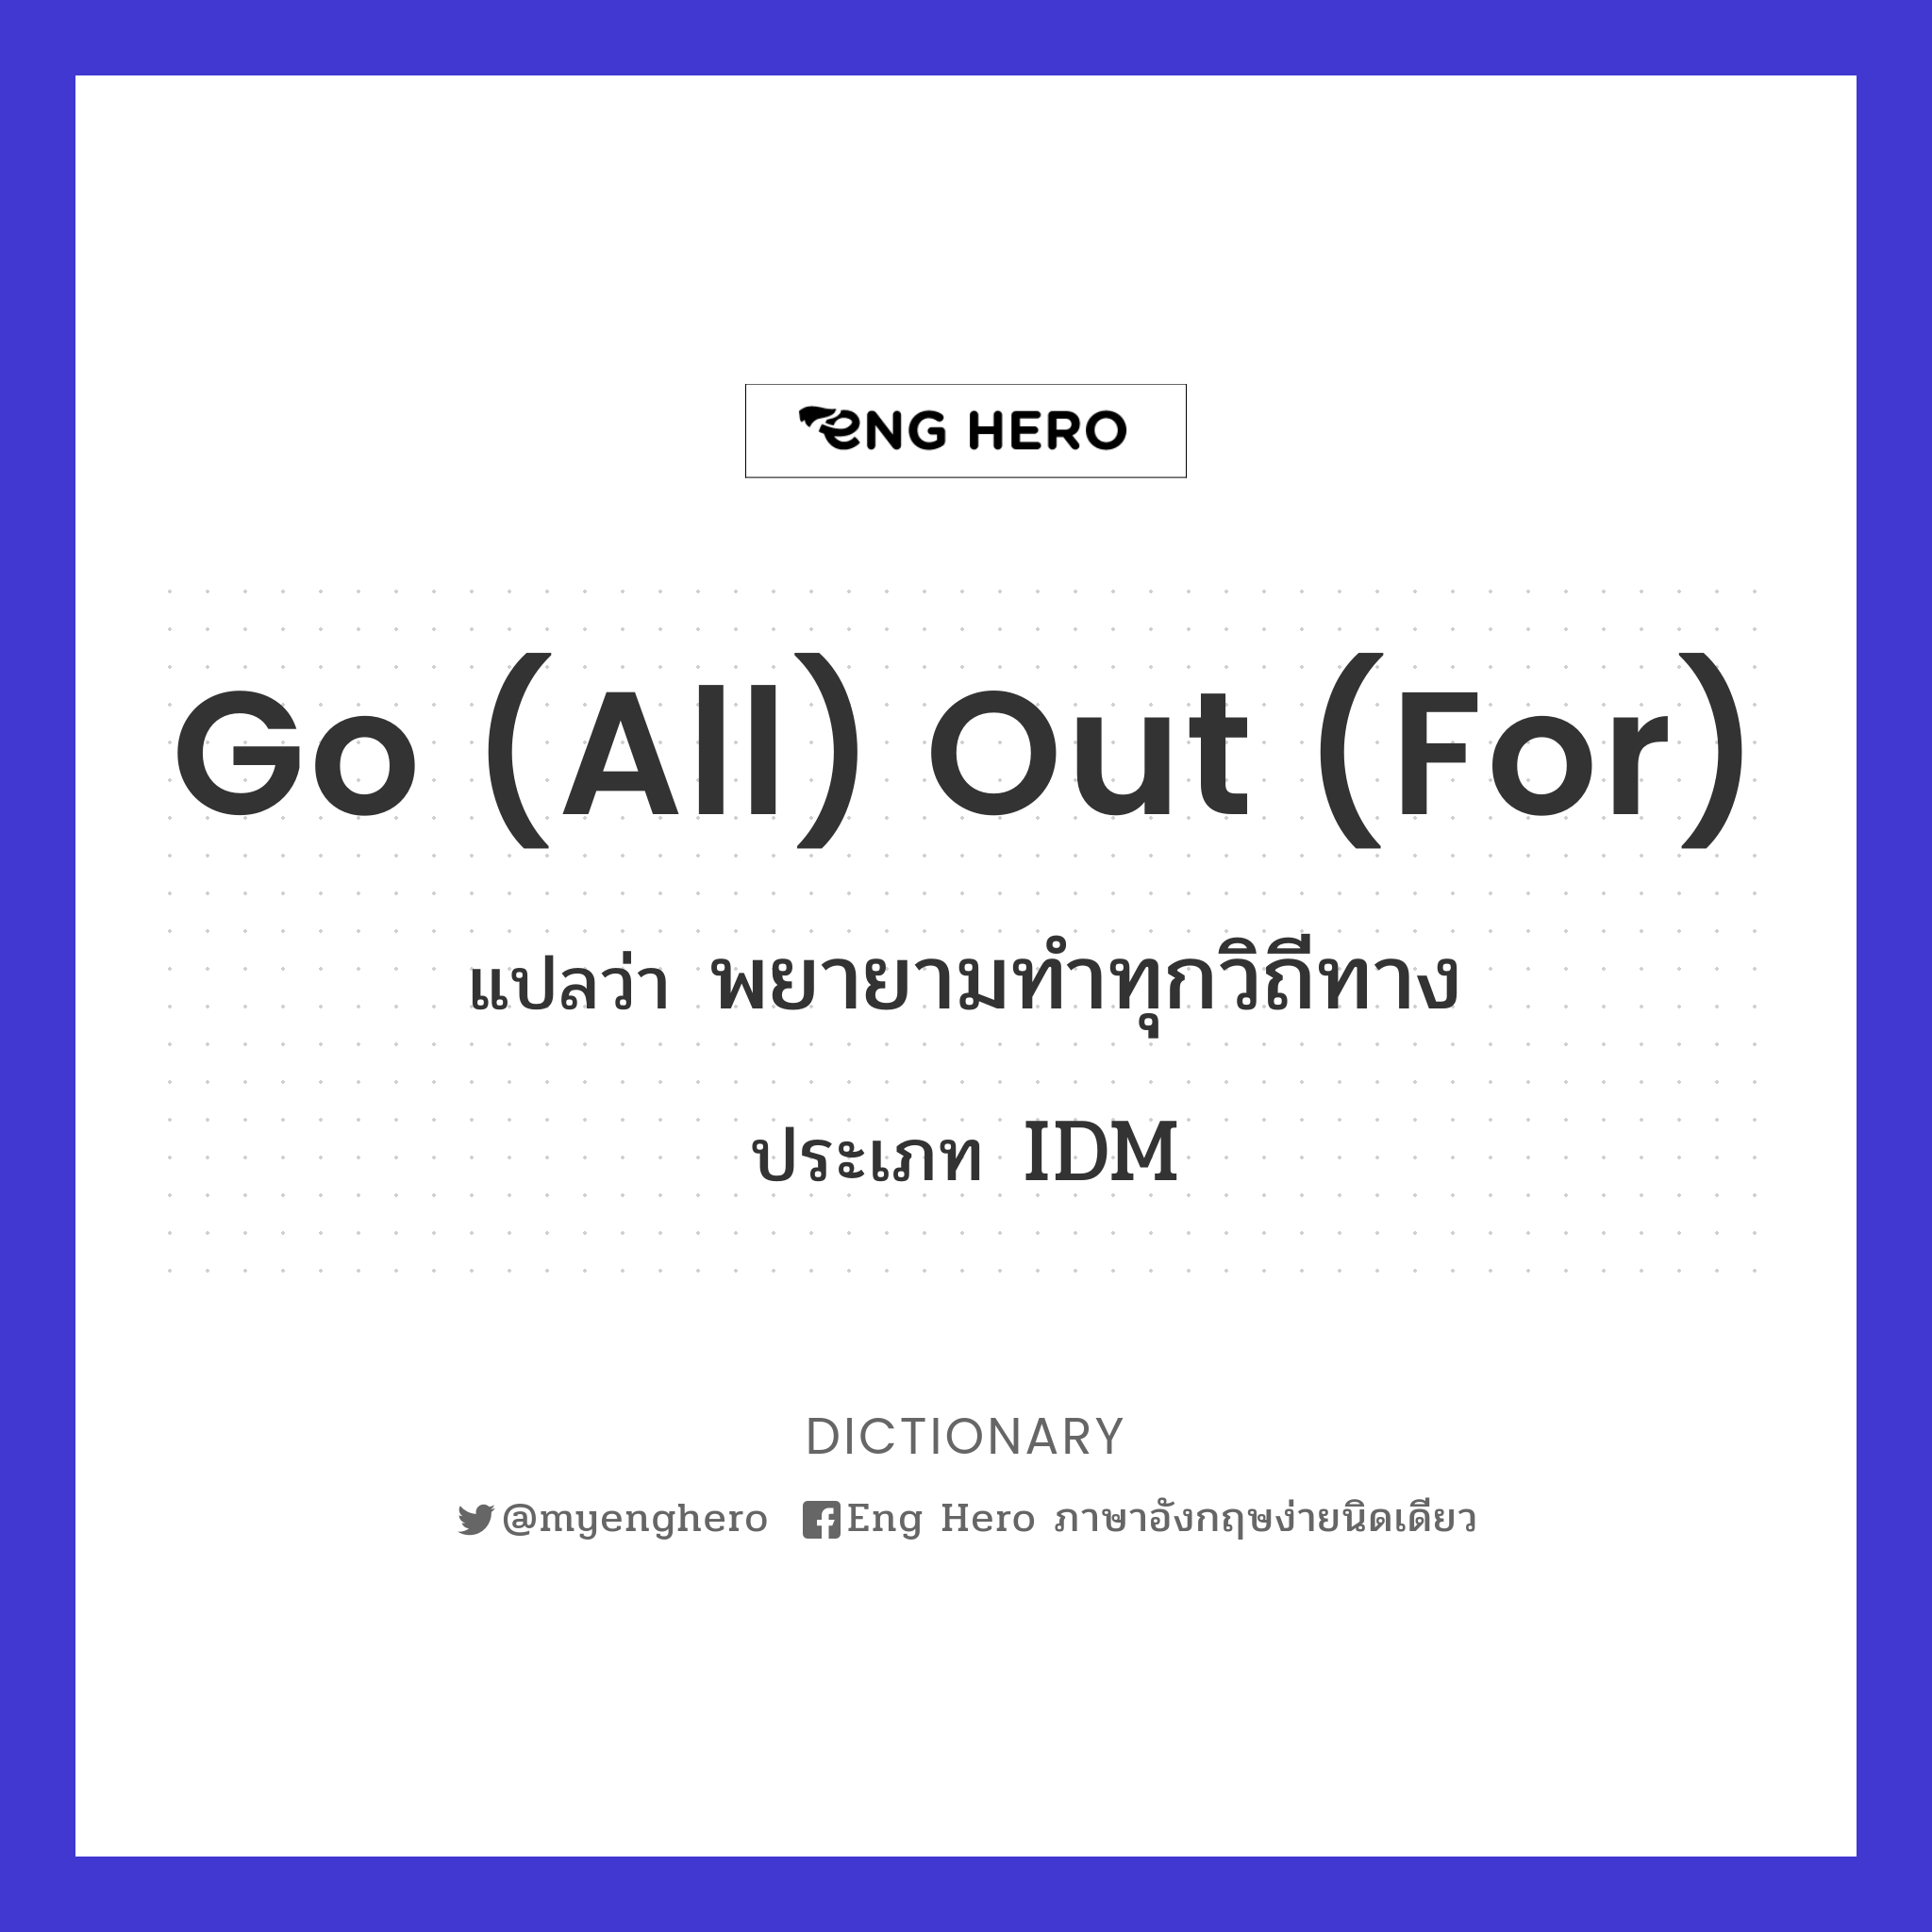 go (all) out (for)